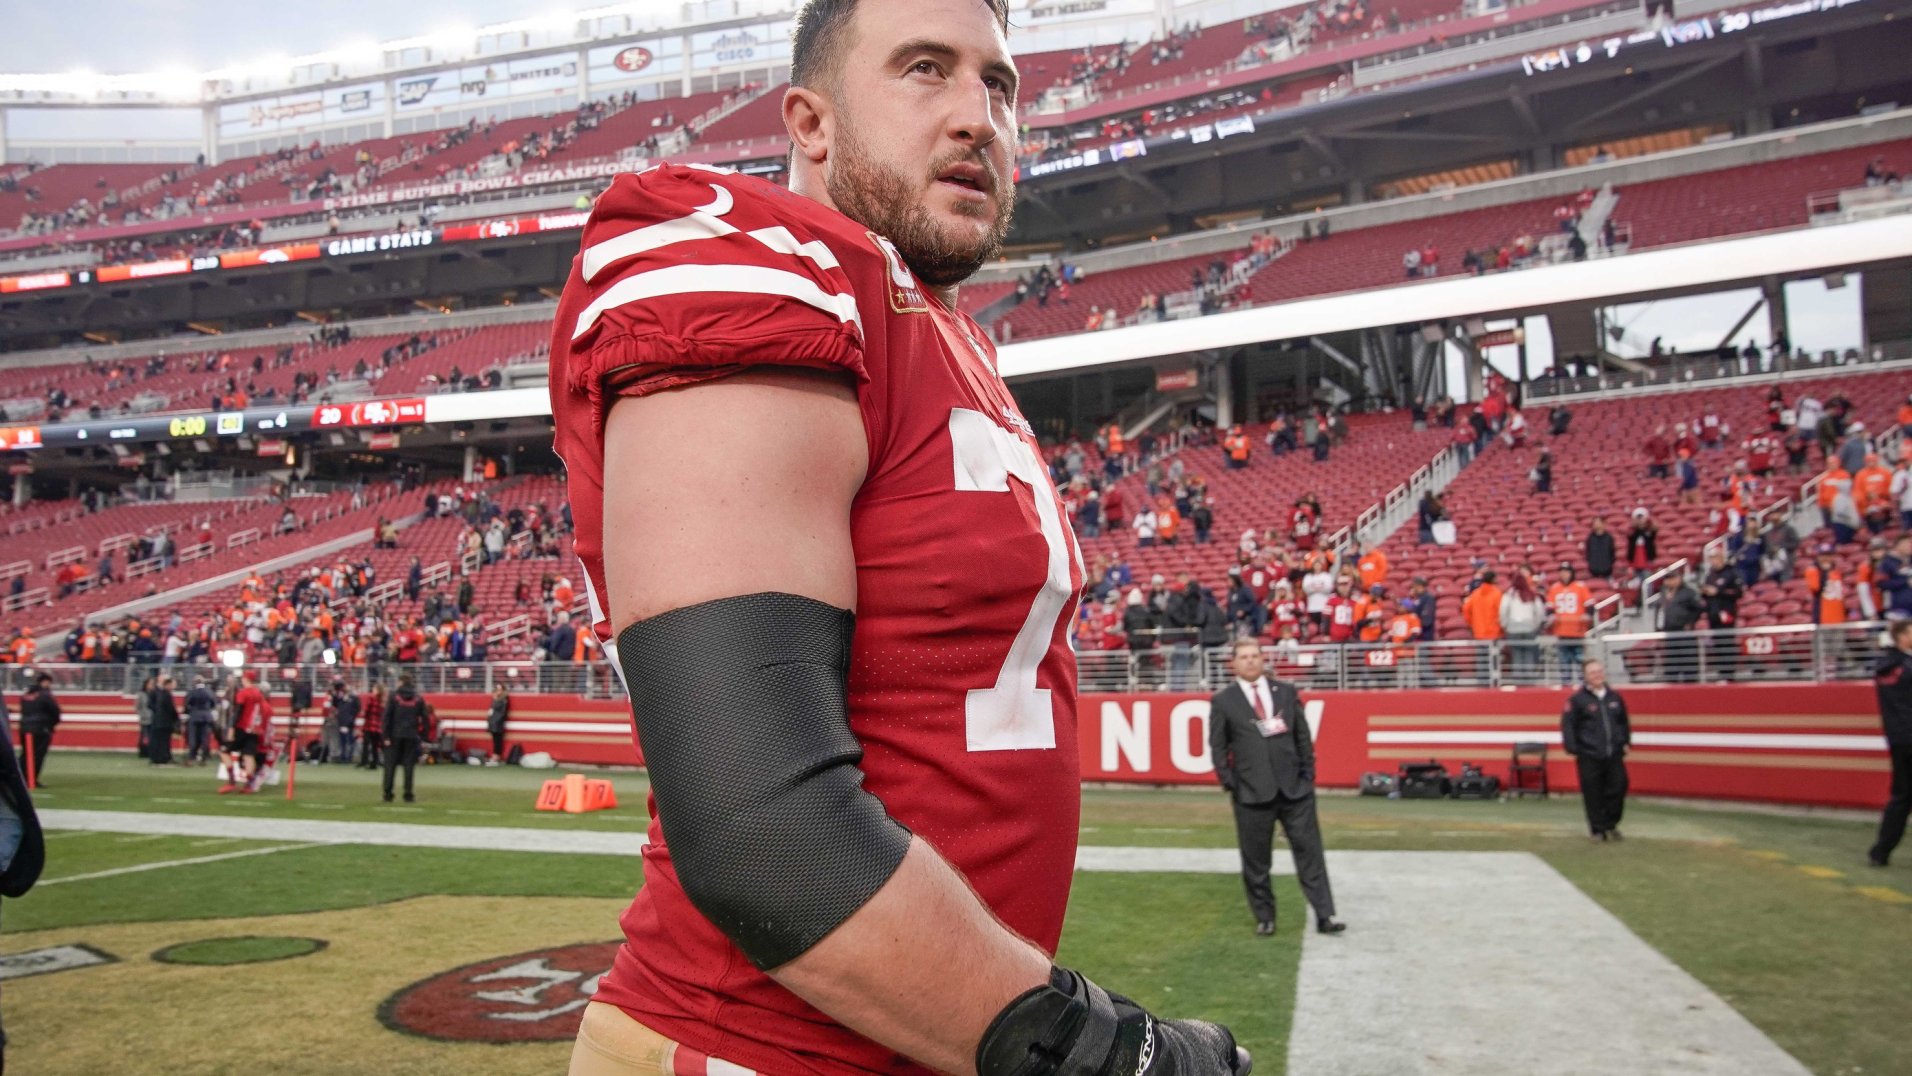 Joe Staley continues to play at a high level, builds his case as one of